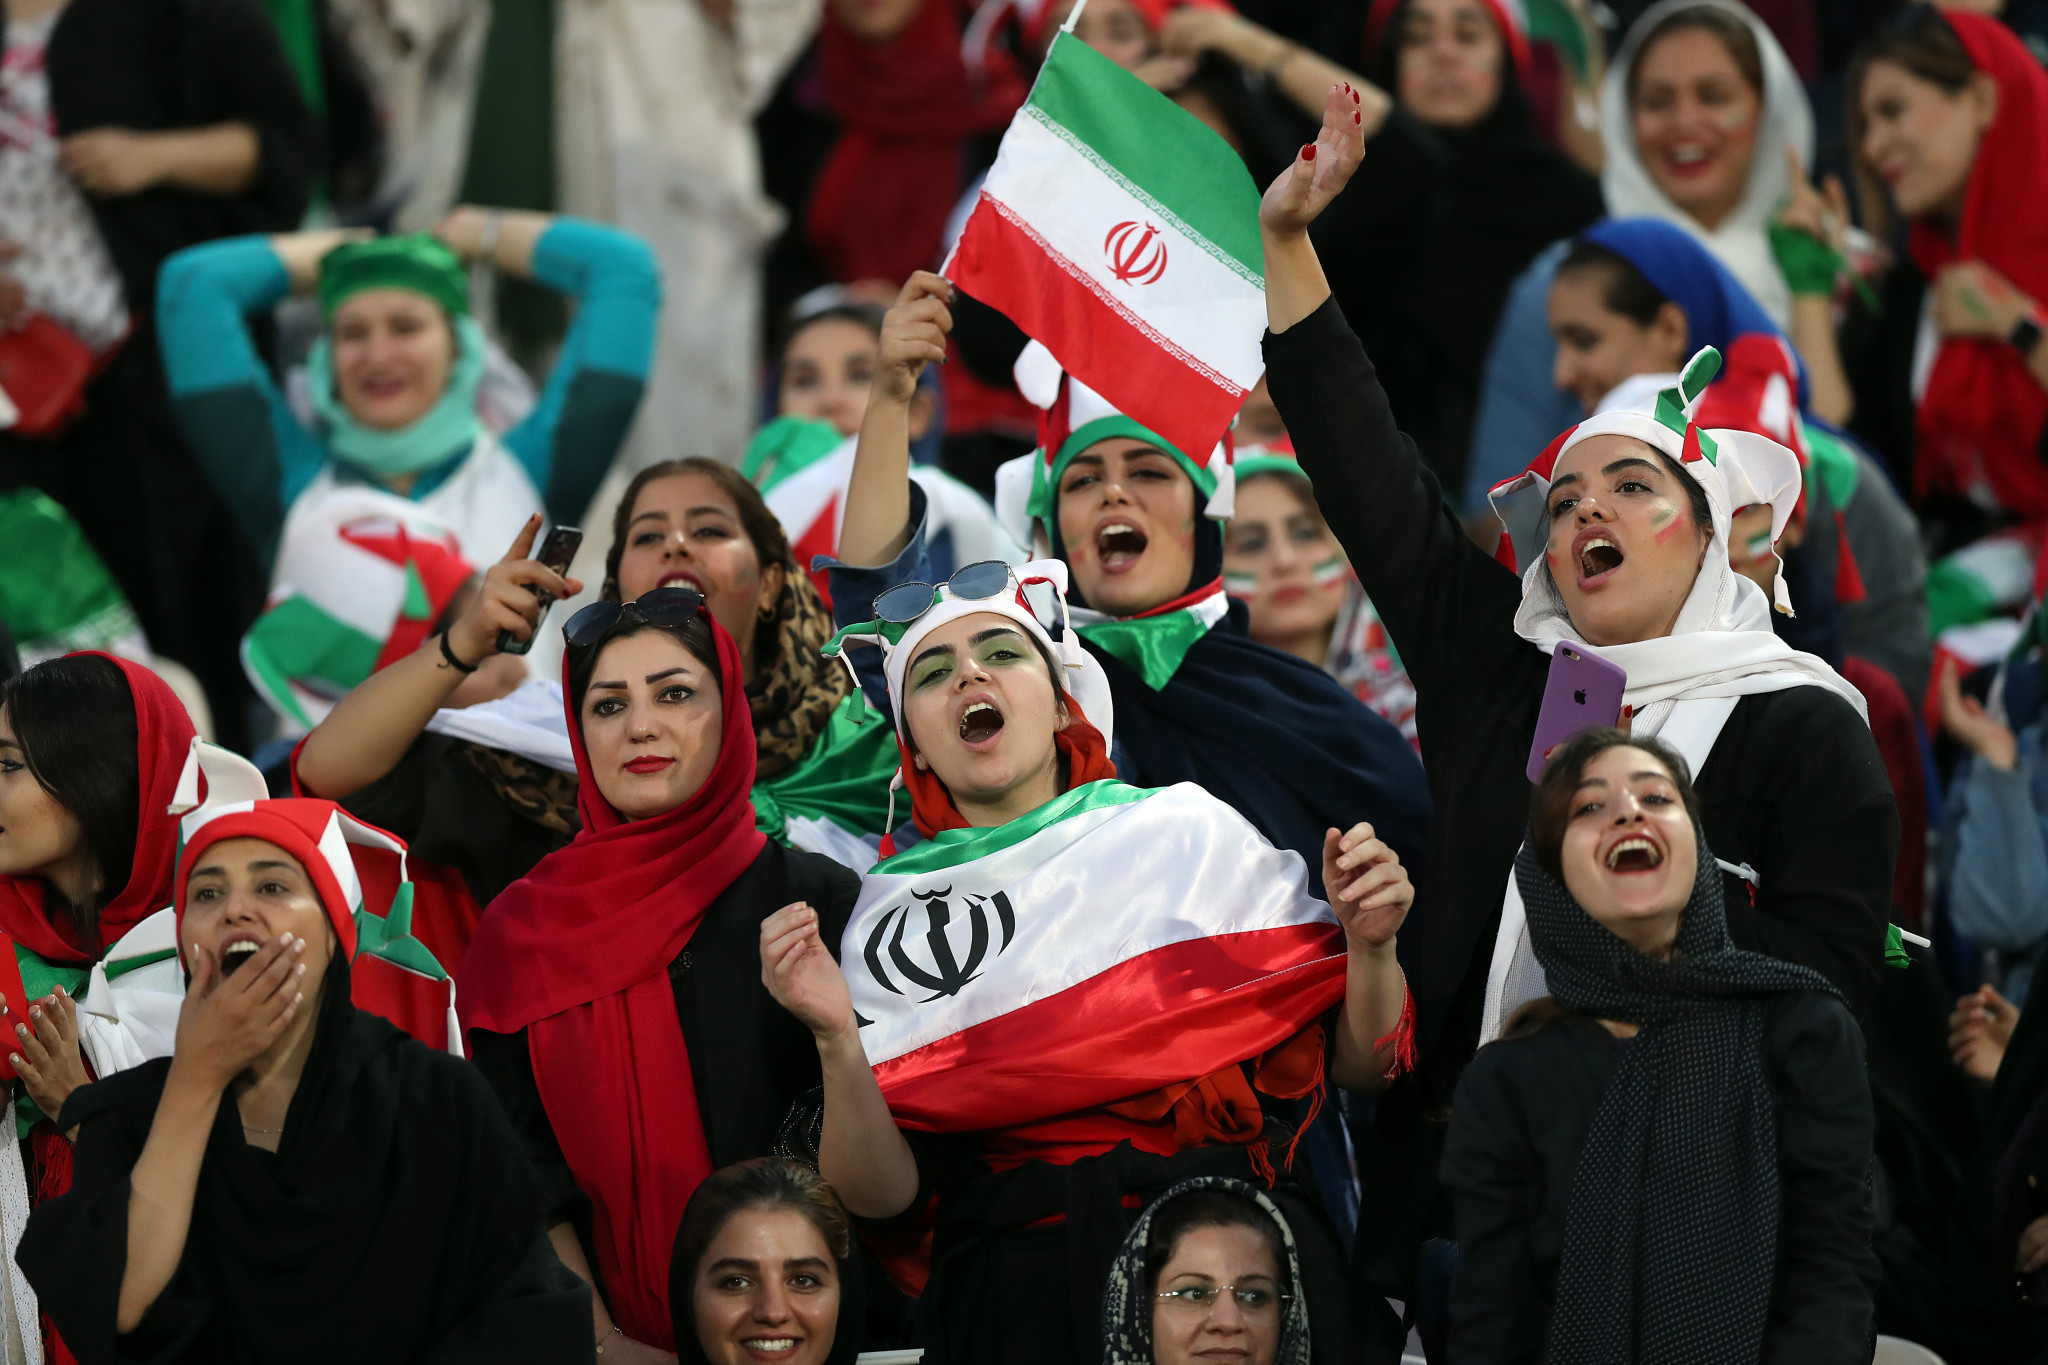 Women's rights group Open Stadiums has urged FIFA to ban Iran from the upcoming World Cup ©Getty Images